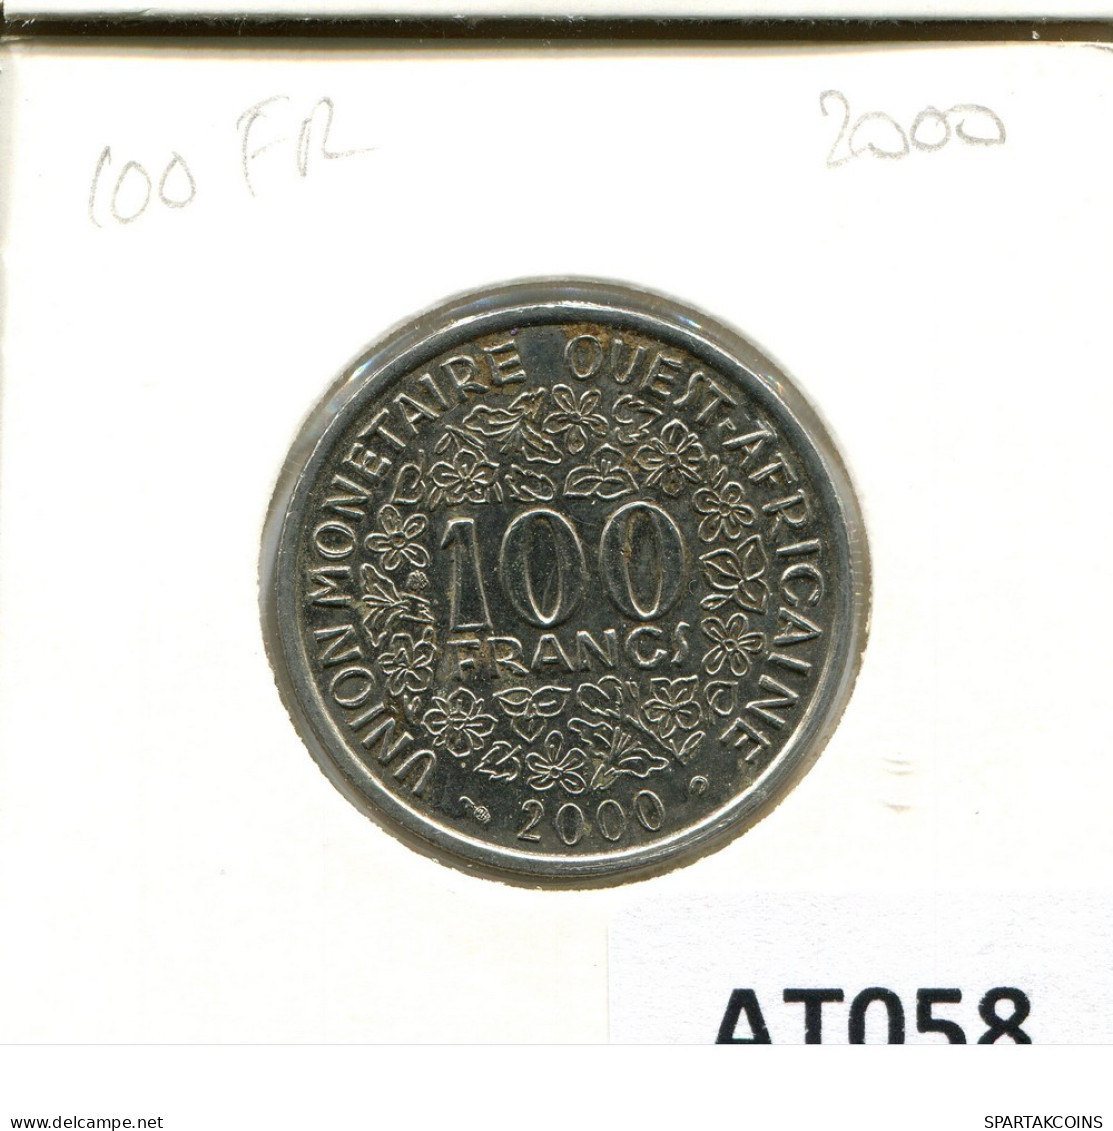 100 FRANCS CFA 2000 Western African States (BCEAO) Pièce #AT058.F.A - Other - Africa